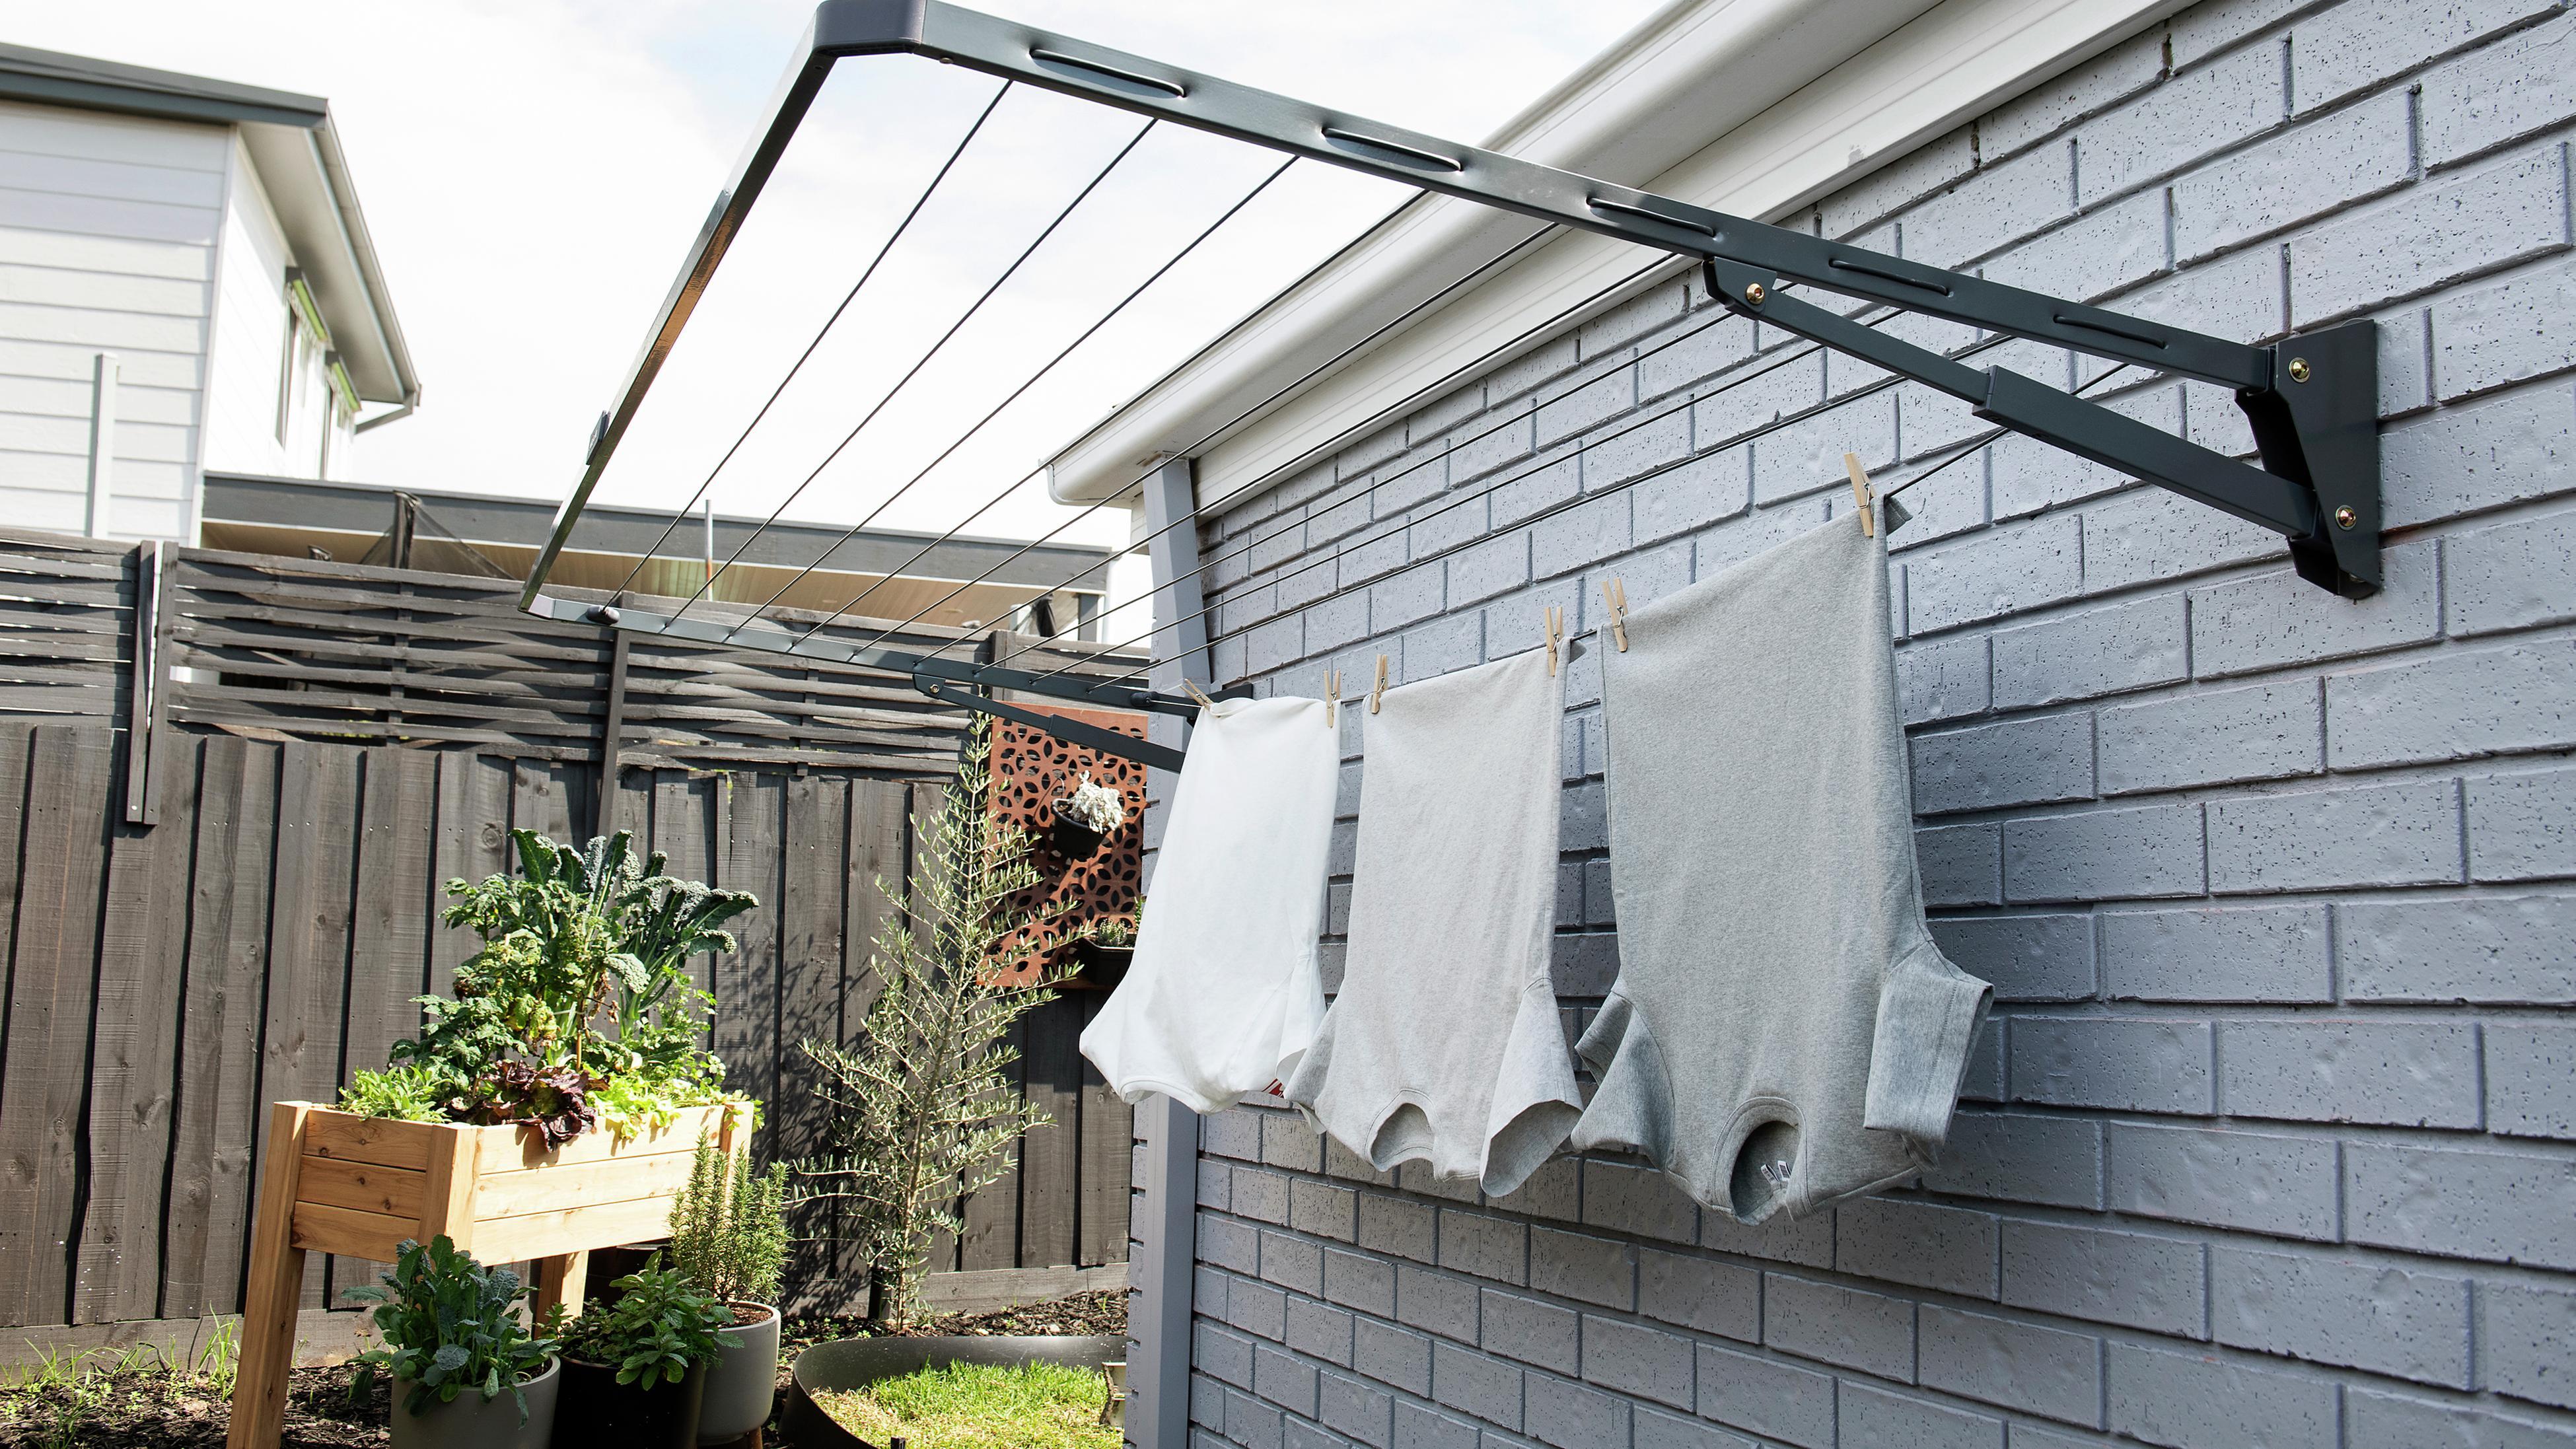 Washing Line or Rotary Dryer? We Discuss the Pros and Cons